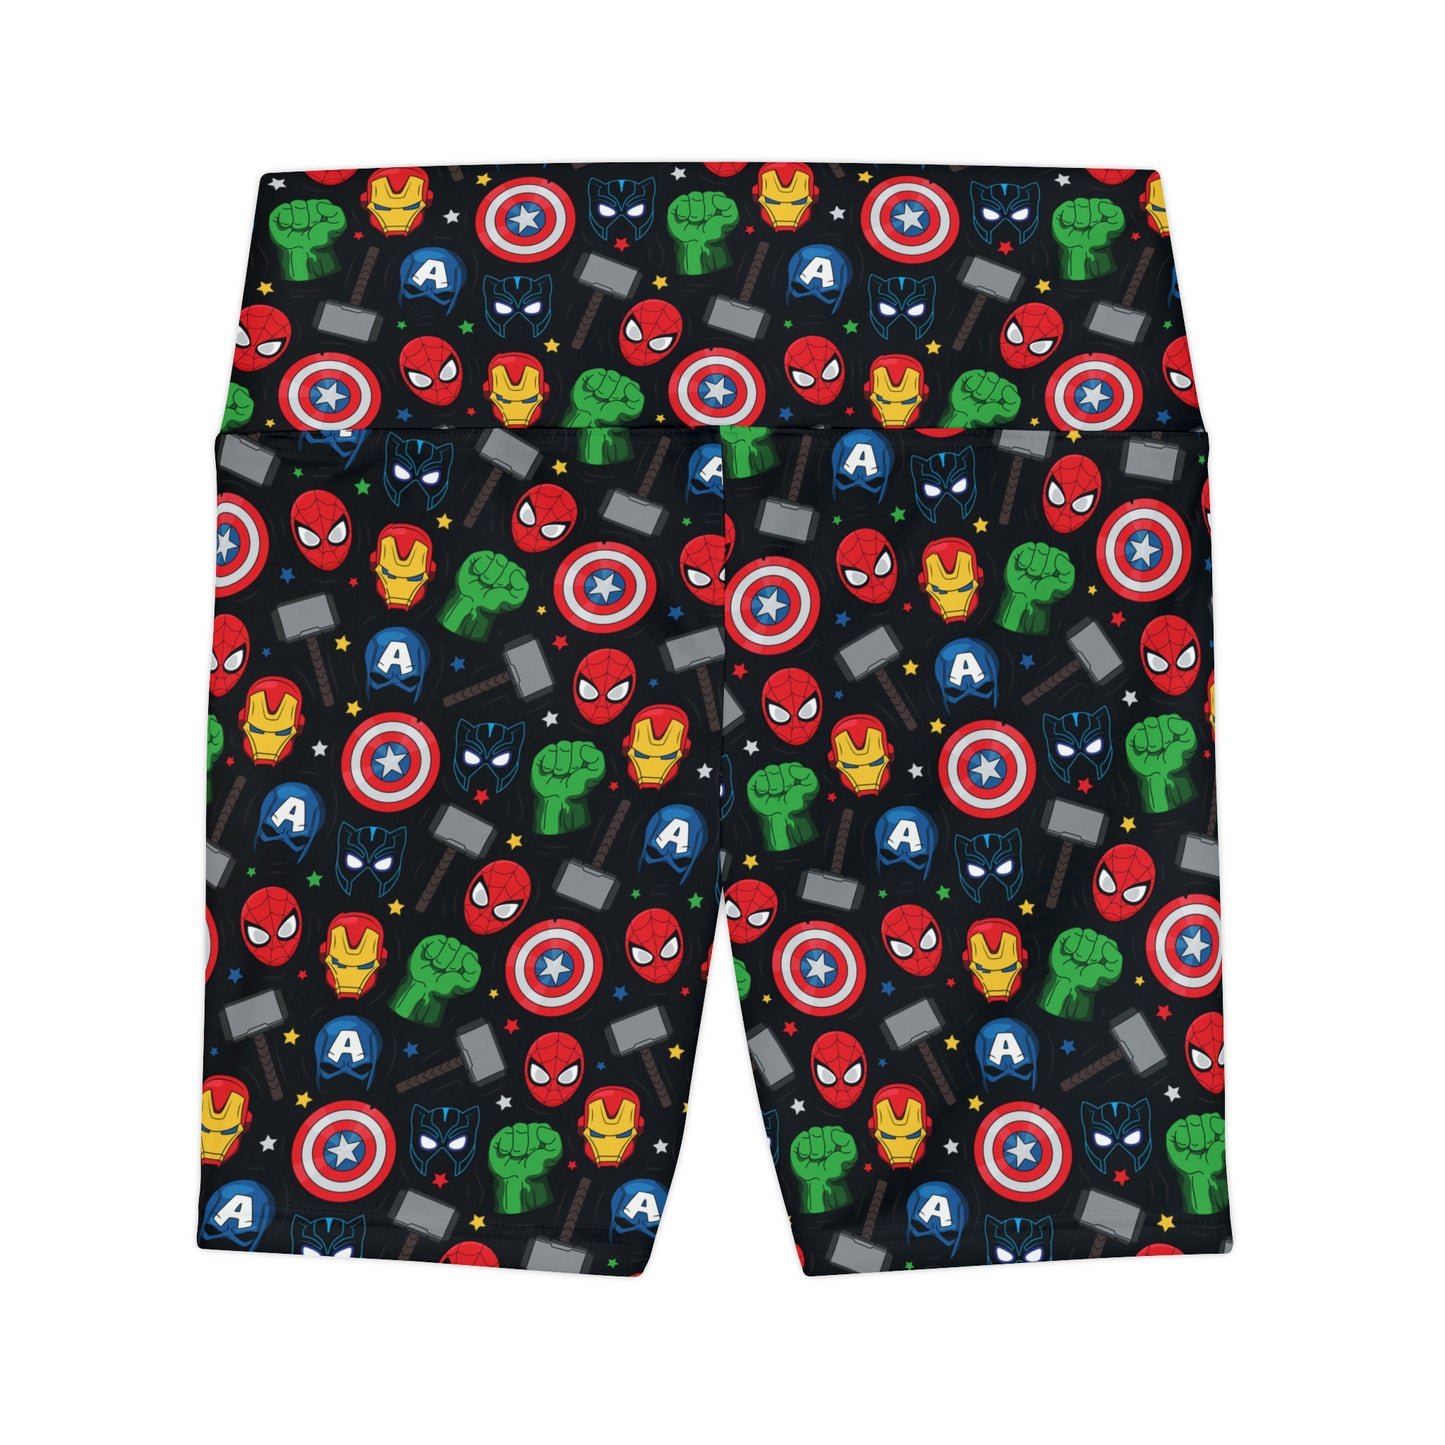 Super Heroes Women's Athletic Workout Shorts